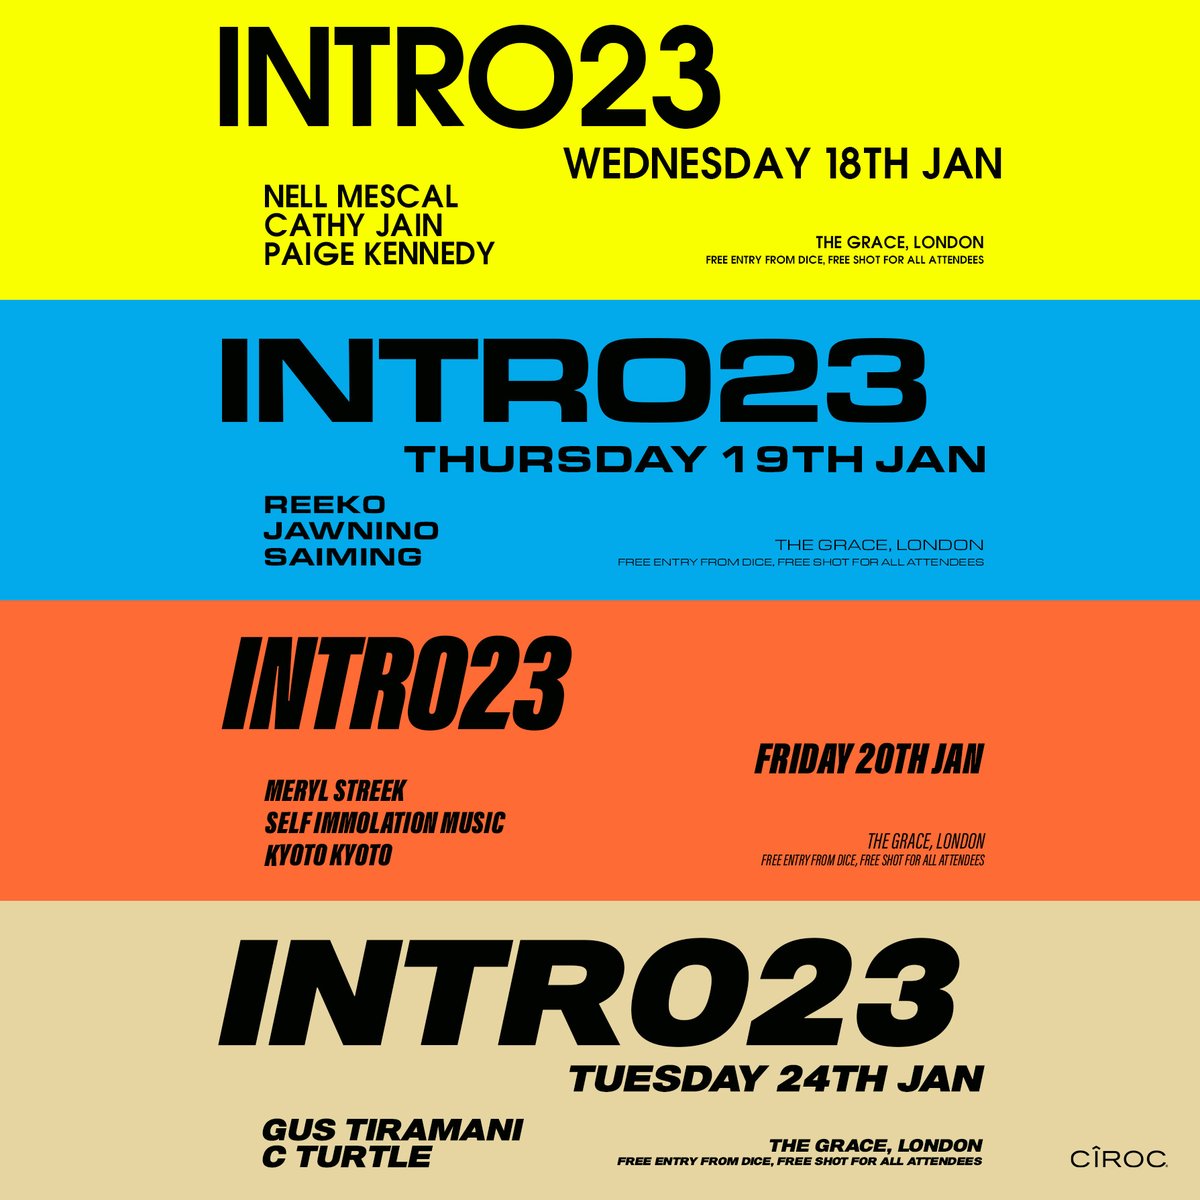 @thegraceldn have announced the line-up for January's INTRO23, showcasing some of the finest new artists inc. @nellmescal_, @cathyyjain, @MerylStreek, @kyotokyotoband, @GusTiramani & many more! Get your free tickets here: bit.ly/3XqikUO